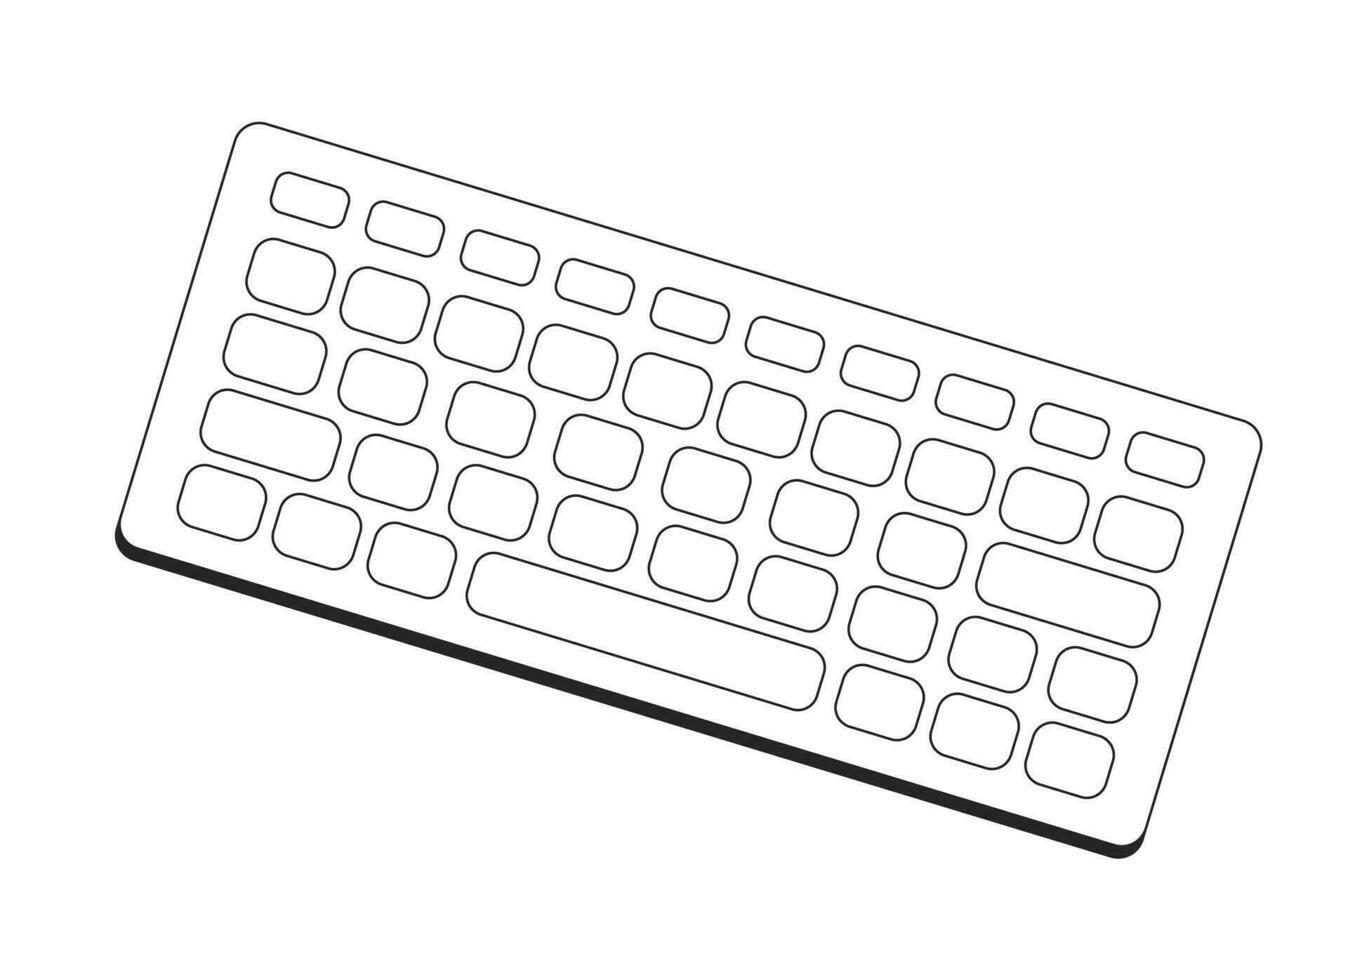 computer keyboard flat monochrome isolated object input device for typing on computer editable black and white line art drawing simple outline spot illustration for web graphic design vector